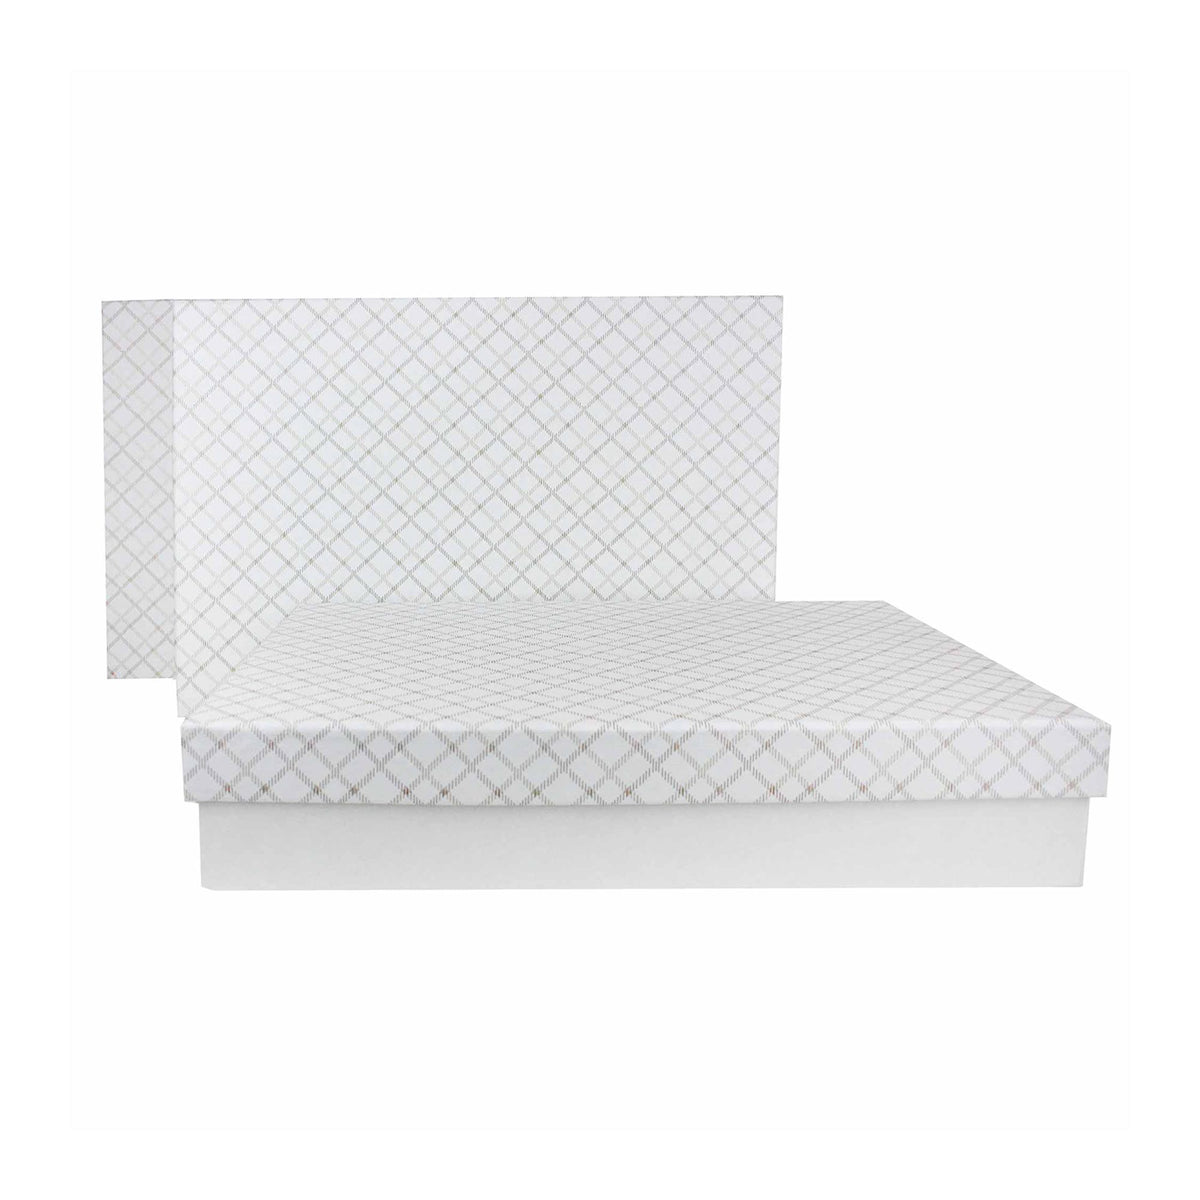 Handcrafted Chequered White Gift Boxes - Set of 3 (Sizes Available)